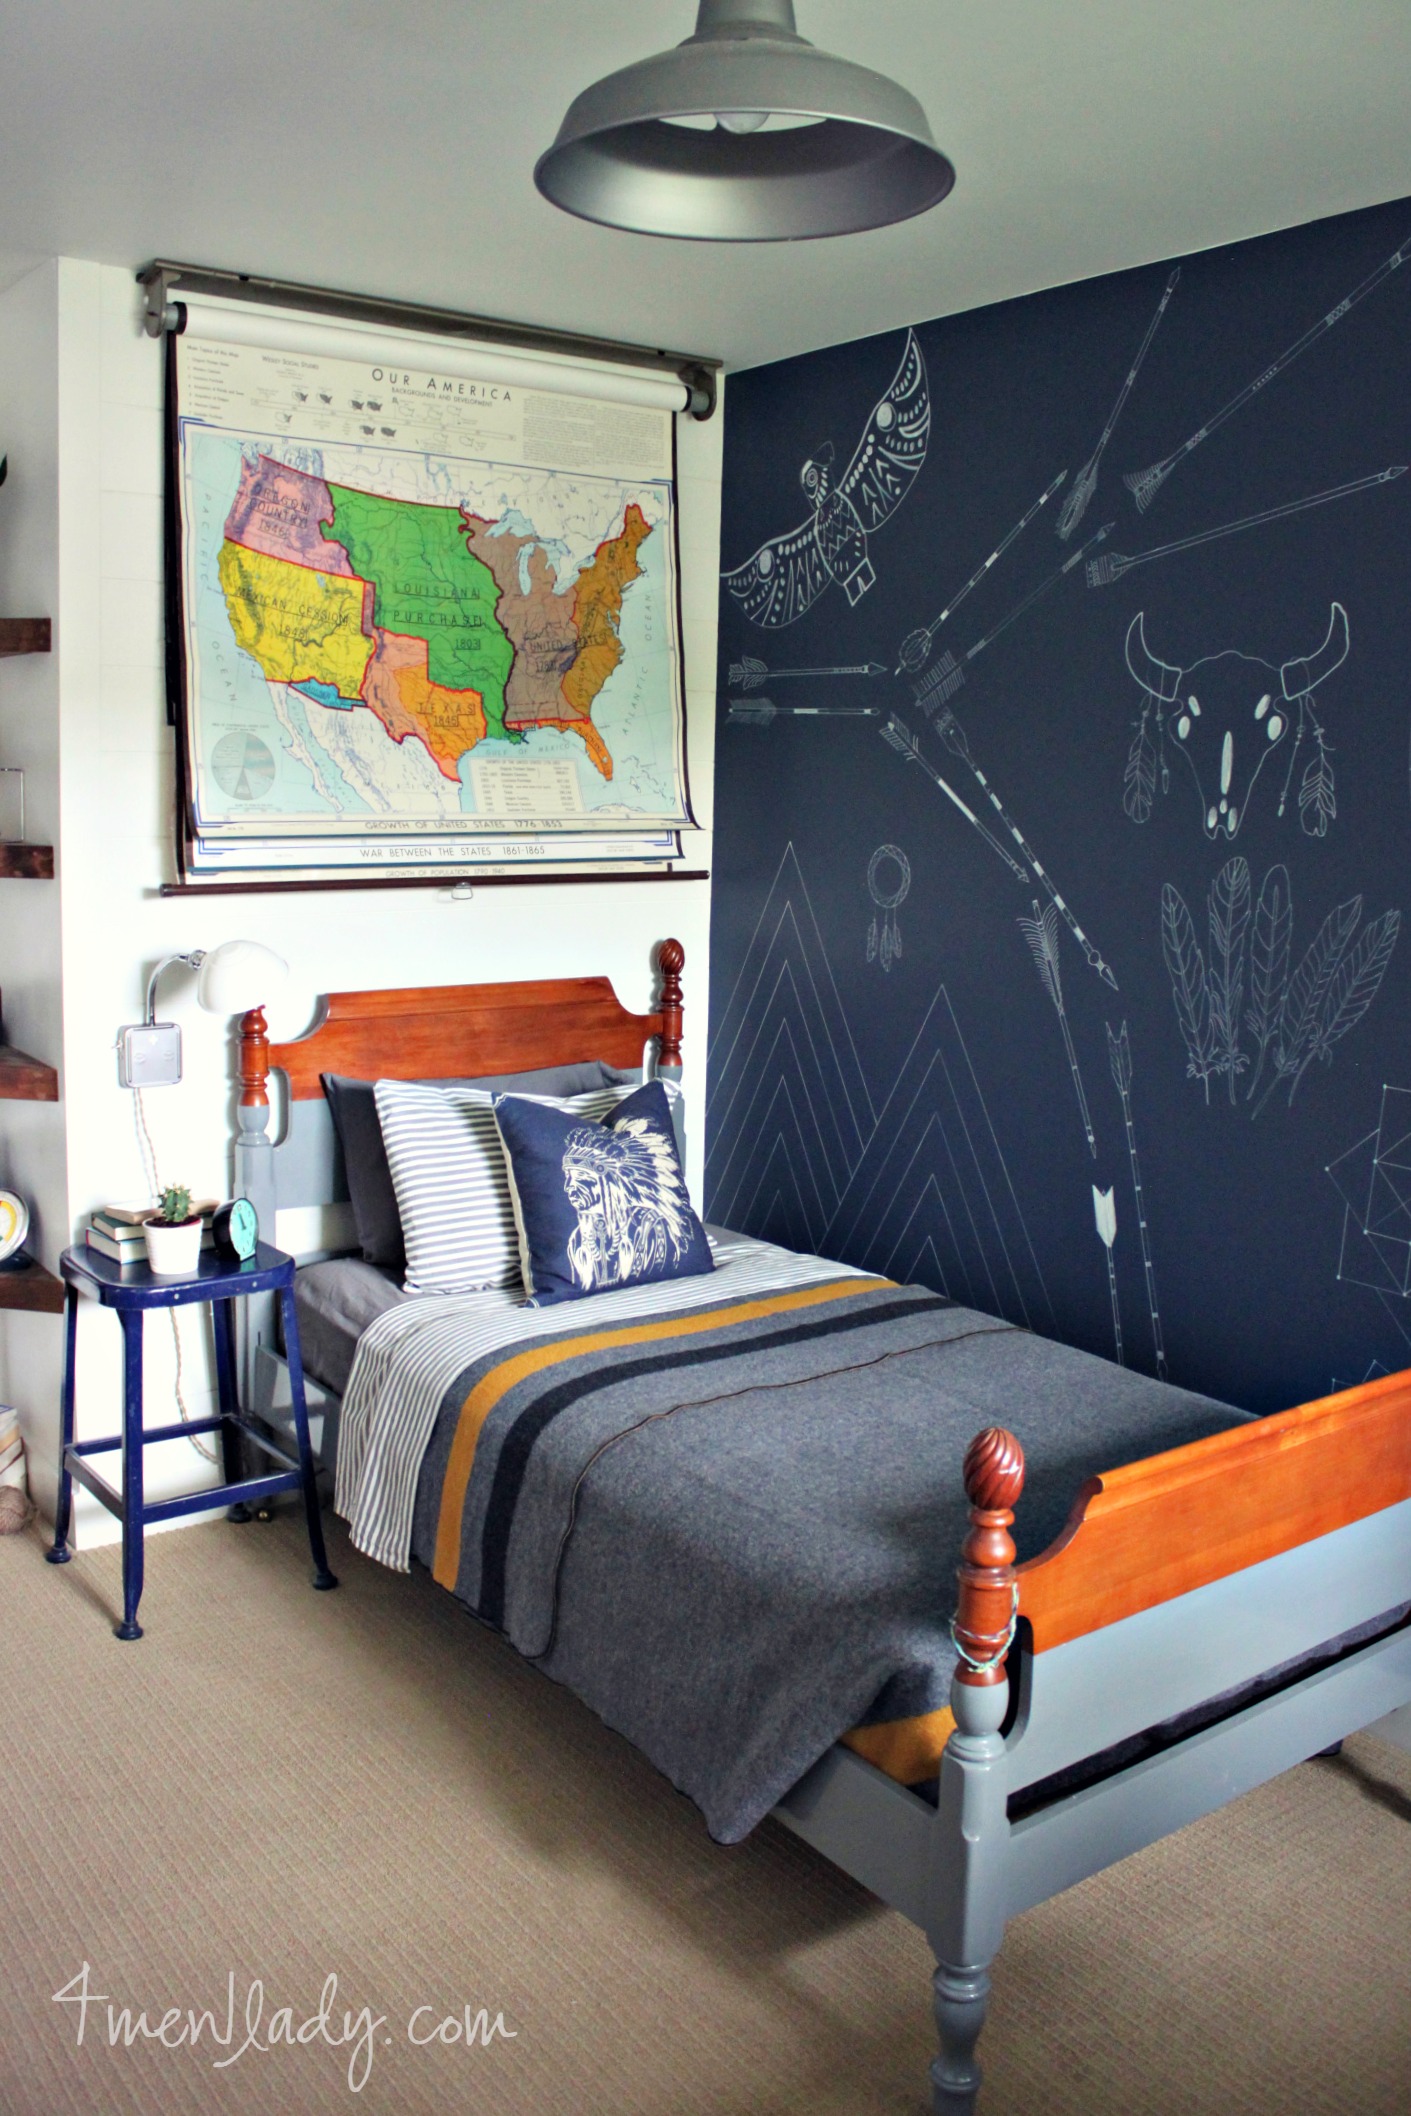 There is a map on the wall and a chalkboard wall beside the bed.